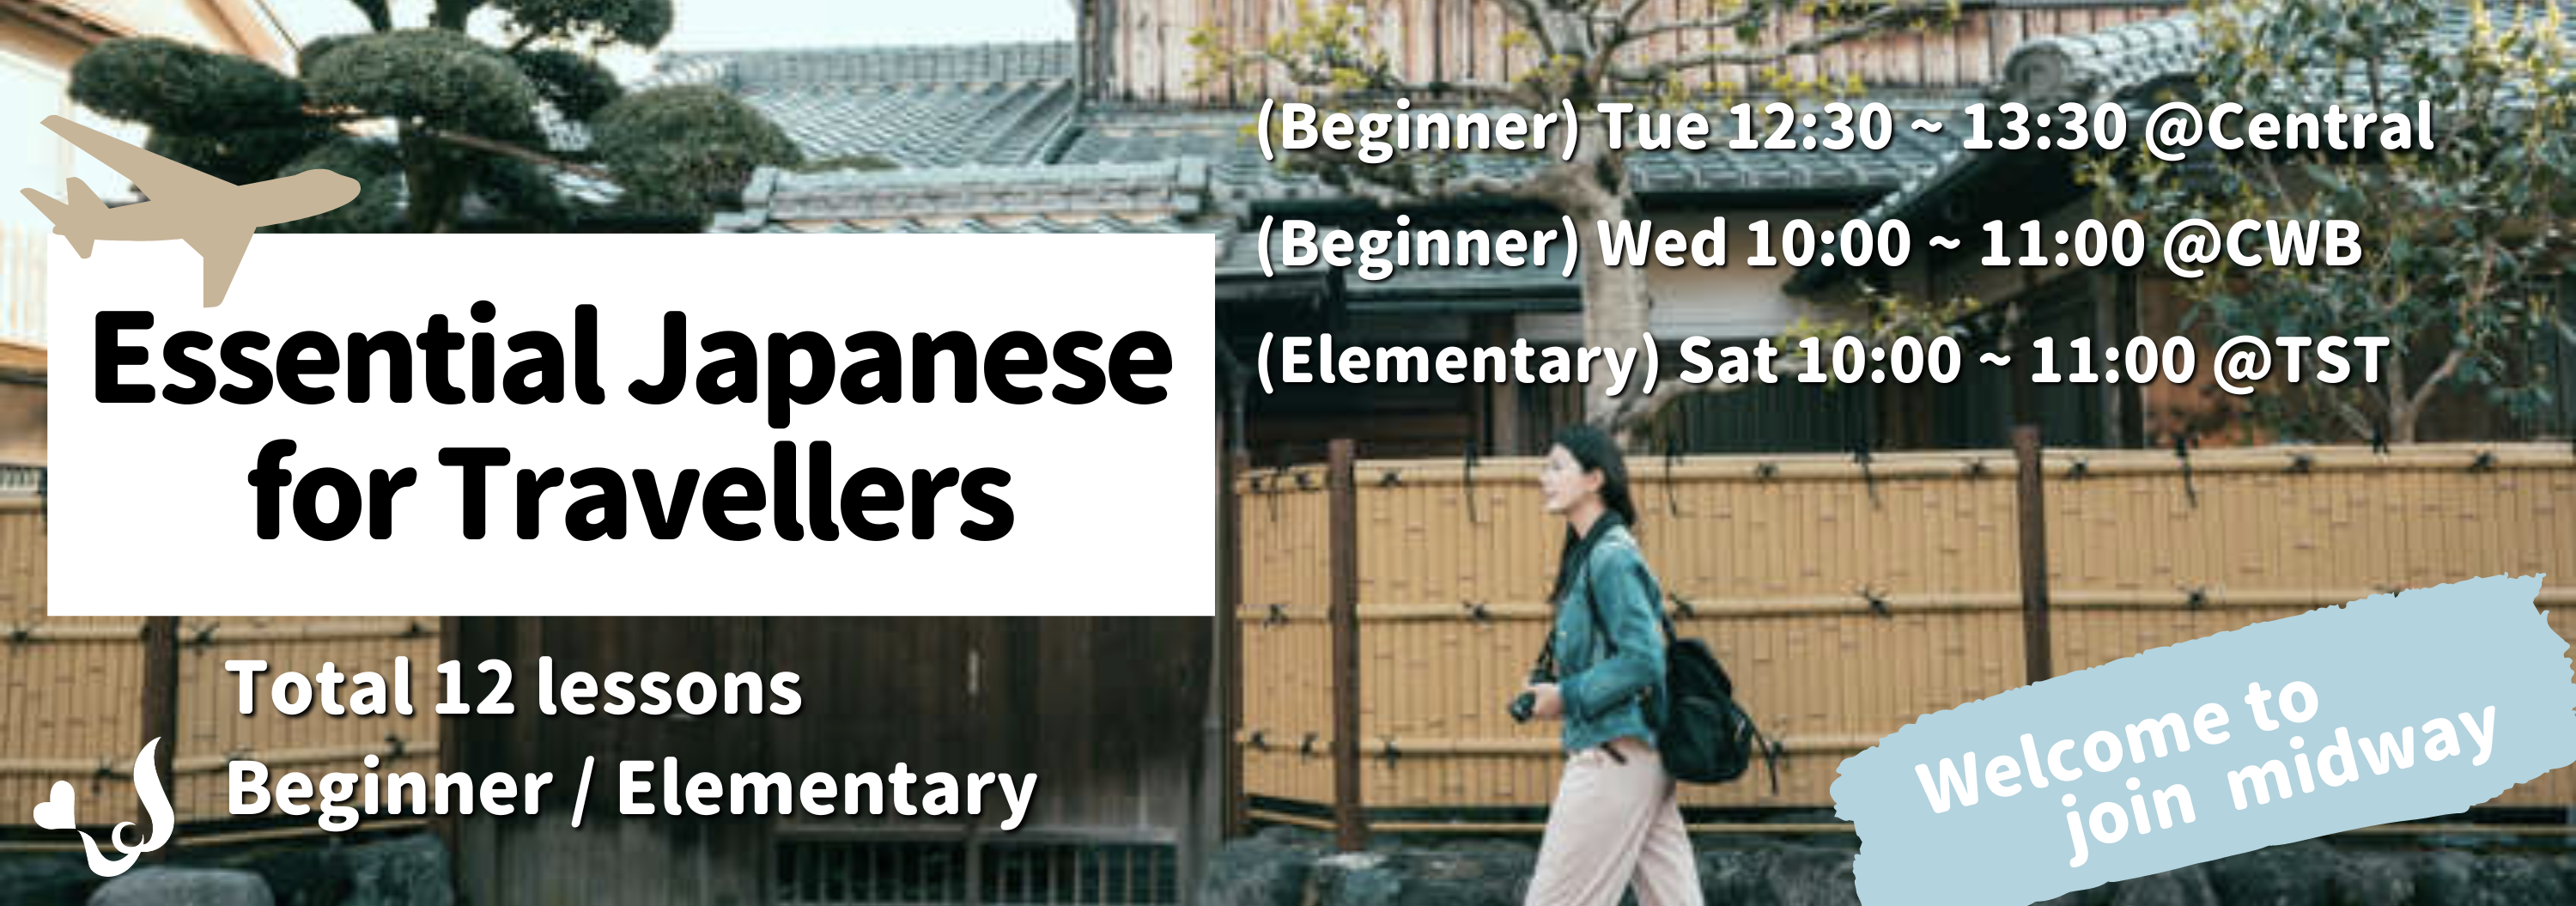 Essential Japanese for Travellers